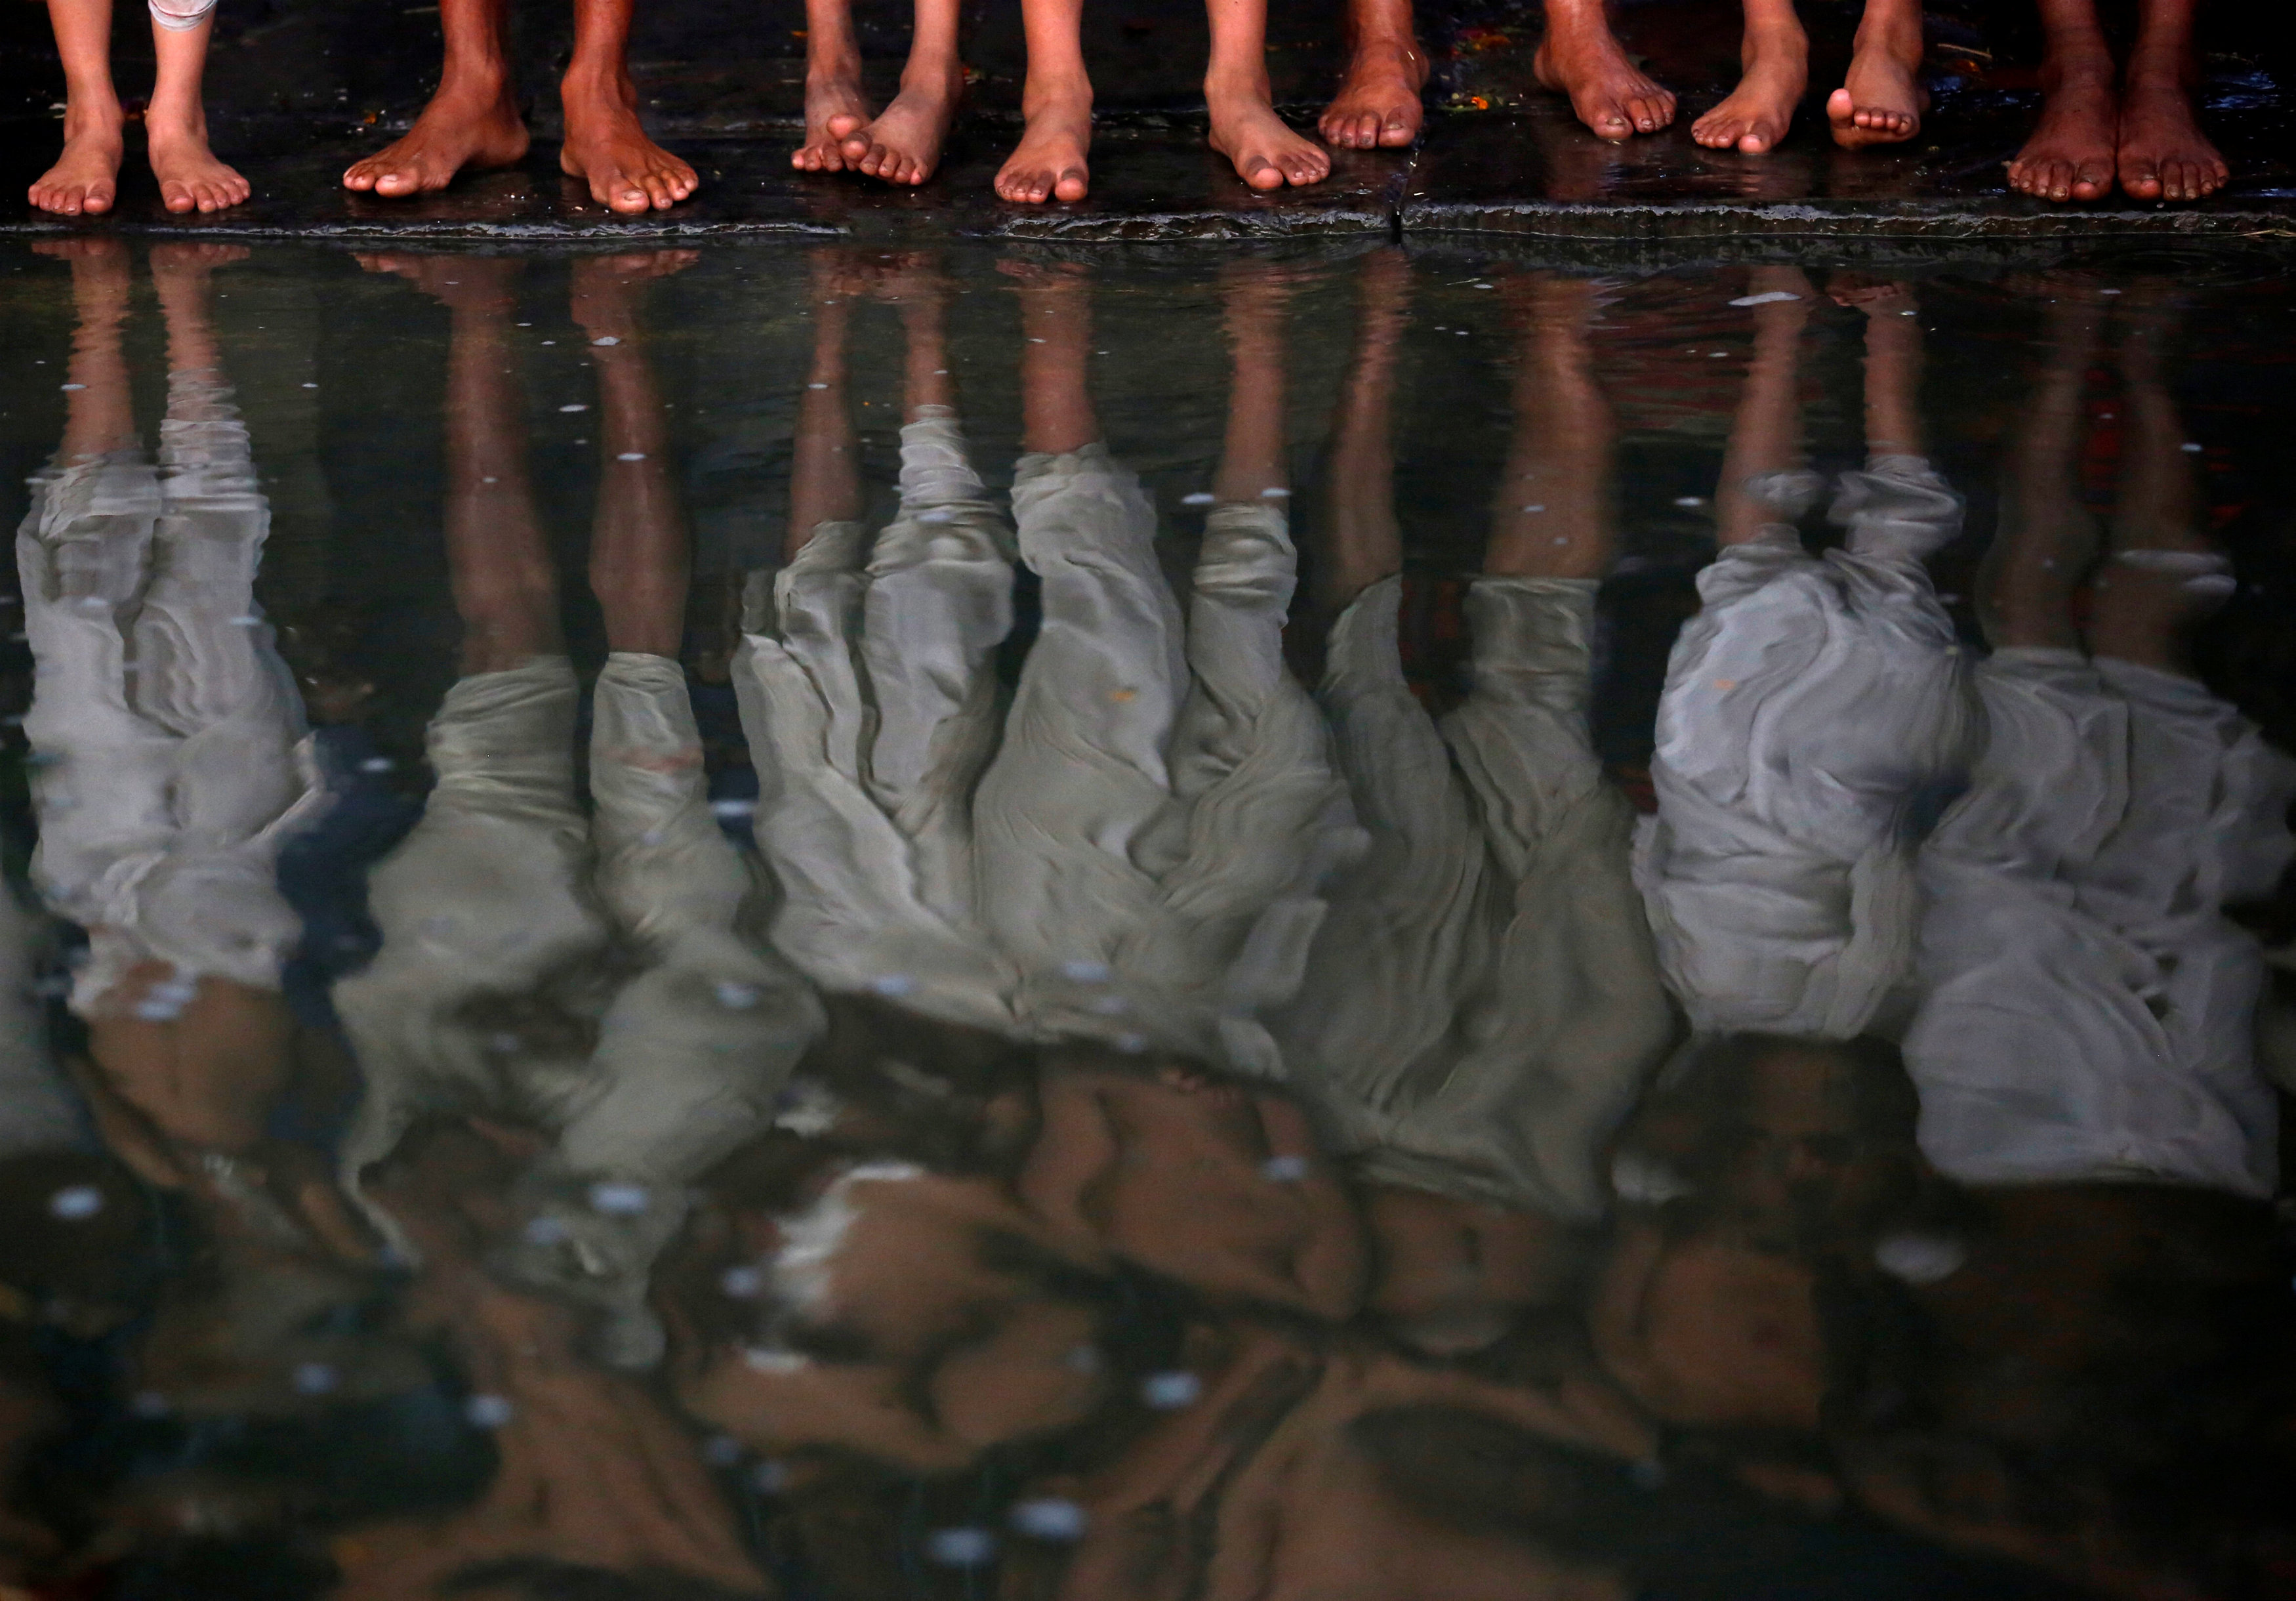 The feet of devotees are pictured as they stand on the bank of the Hanumante River during the Swasthani Brata Katha festival in Bhaktapur, Nepal January 13, 2017. REUTERS/Navesh Chitrakar